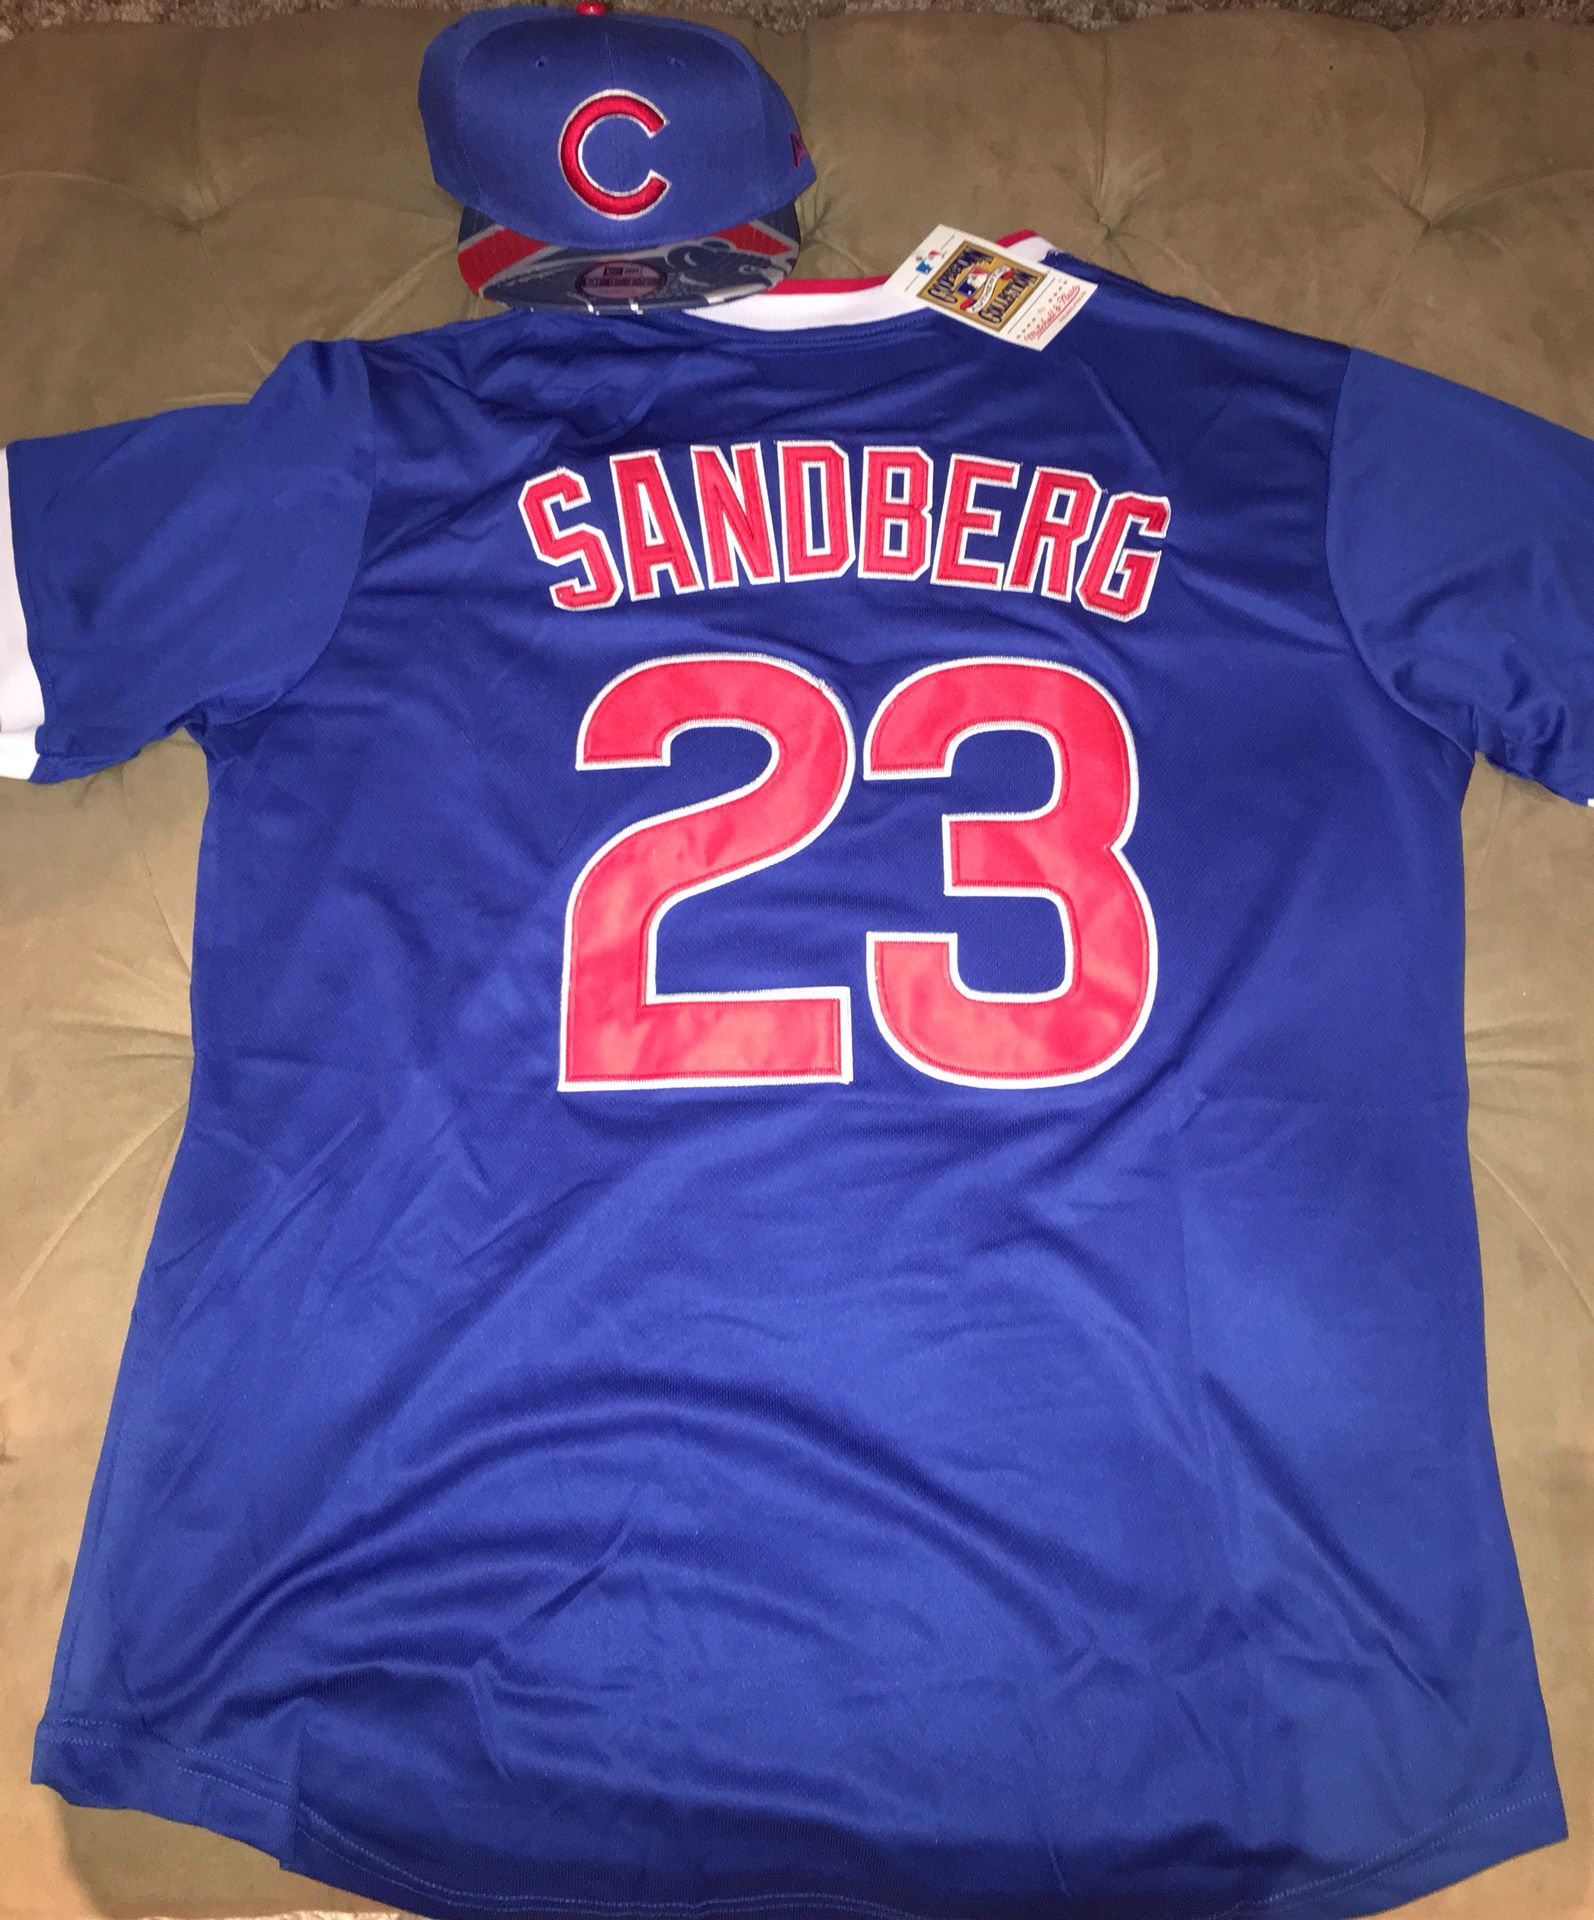 Sandberg Cubs baseball jersey large/XL available brand new with hat$40